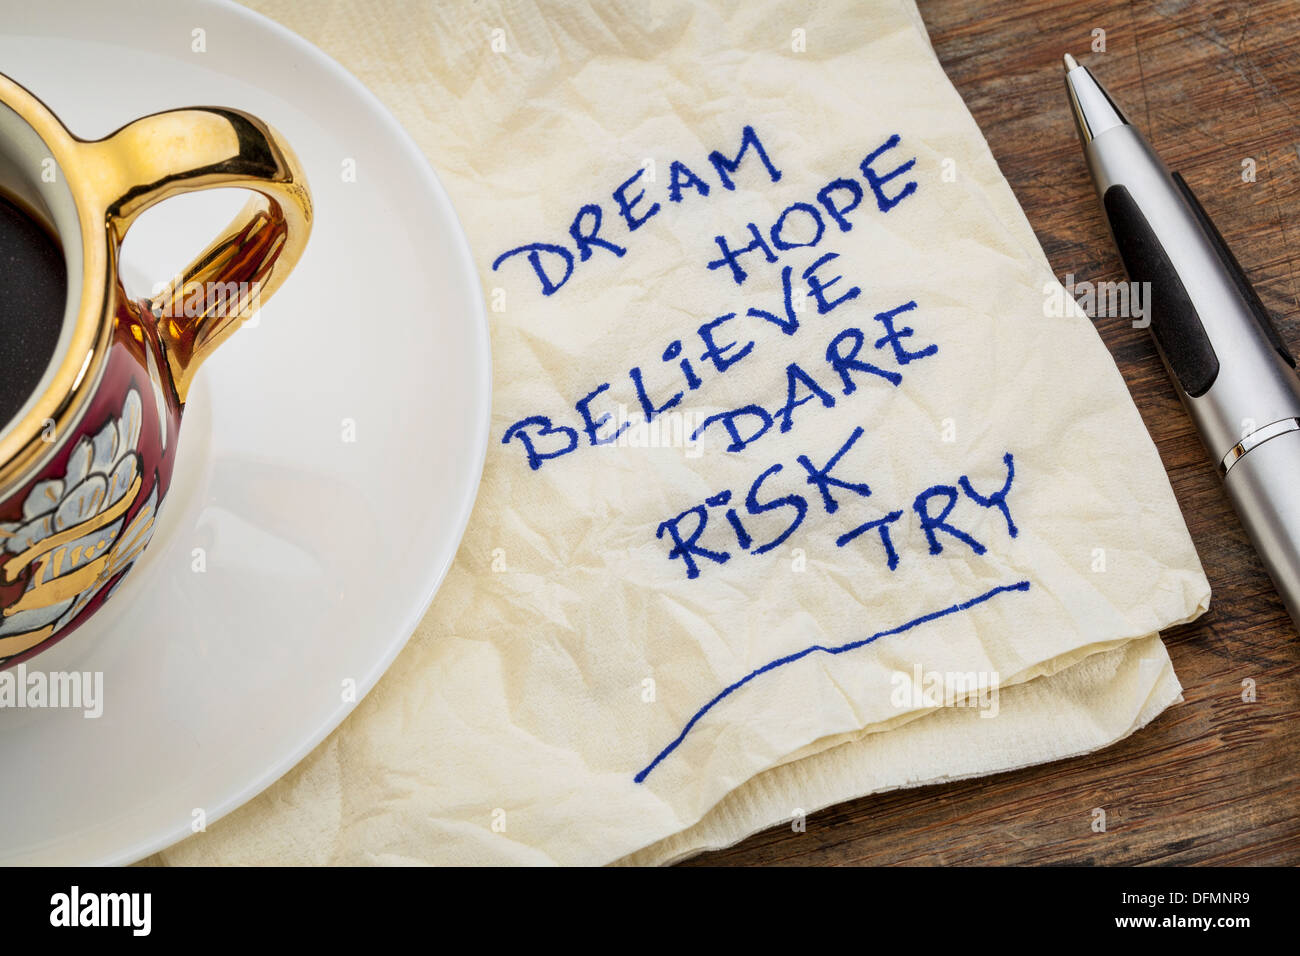 dream, hope, believe, dare, risk, try - motivational words - a napkin